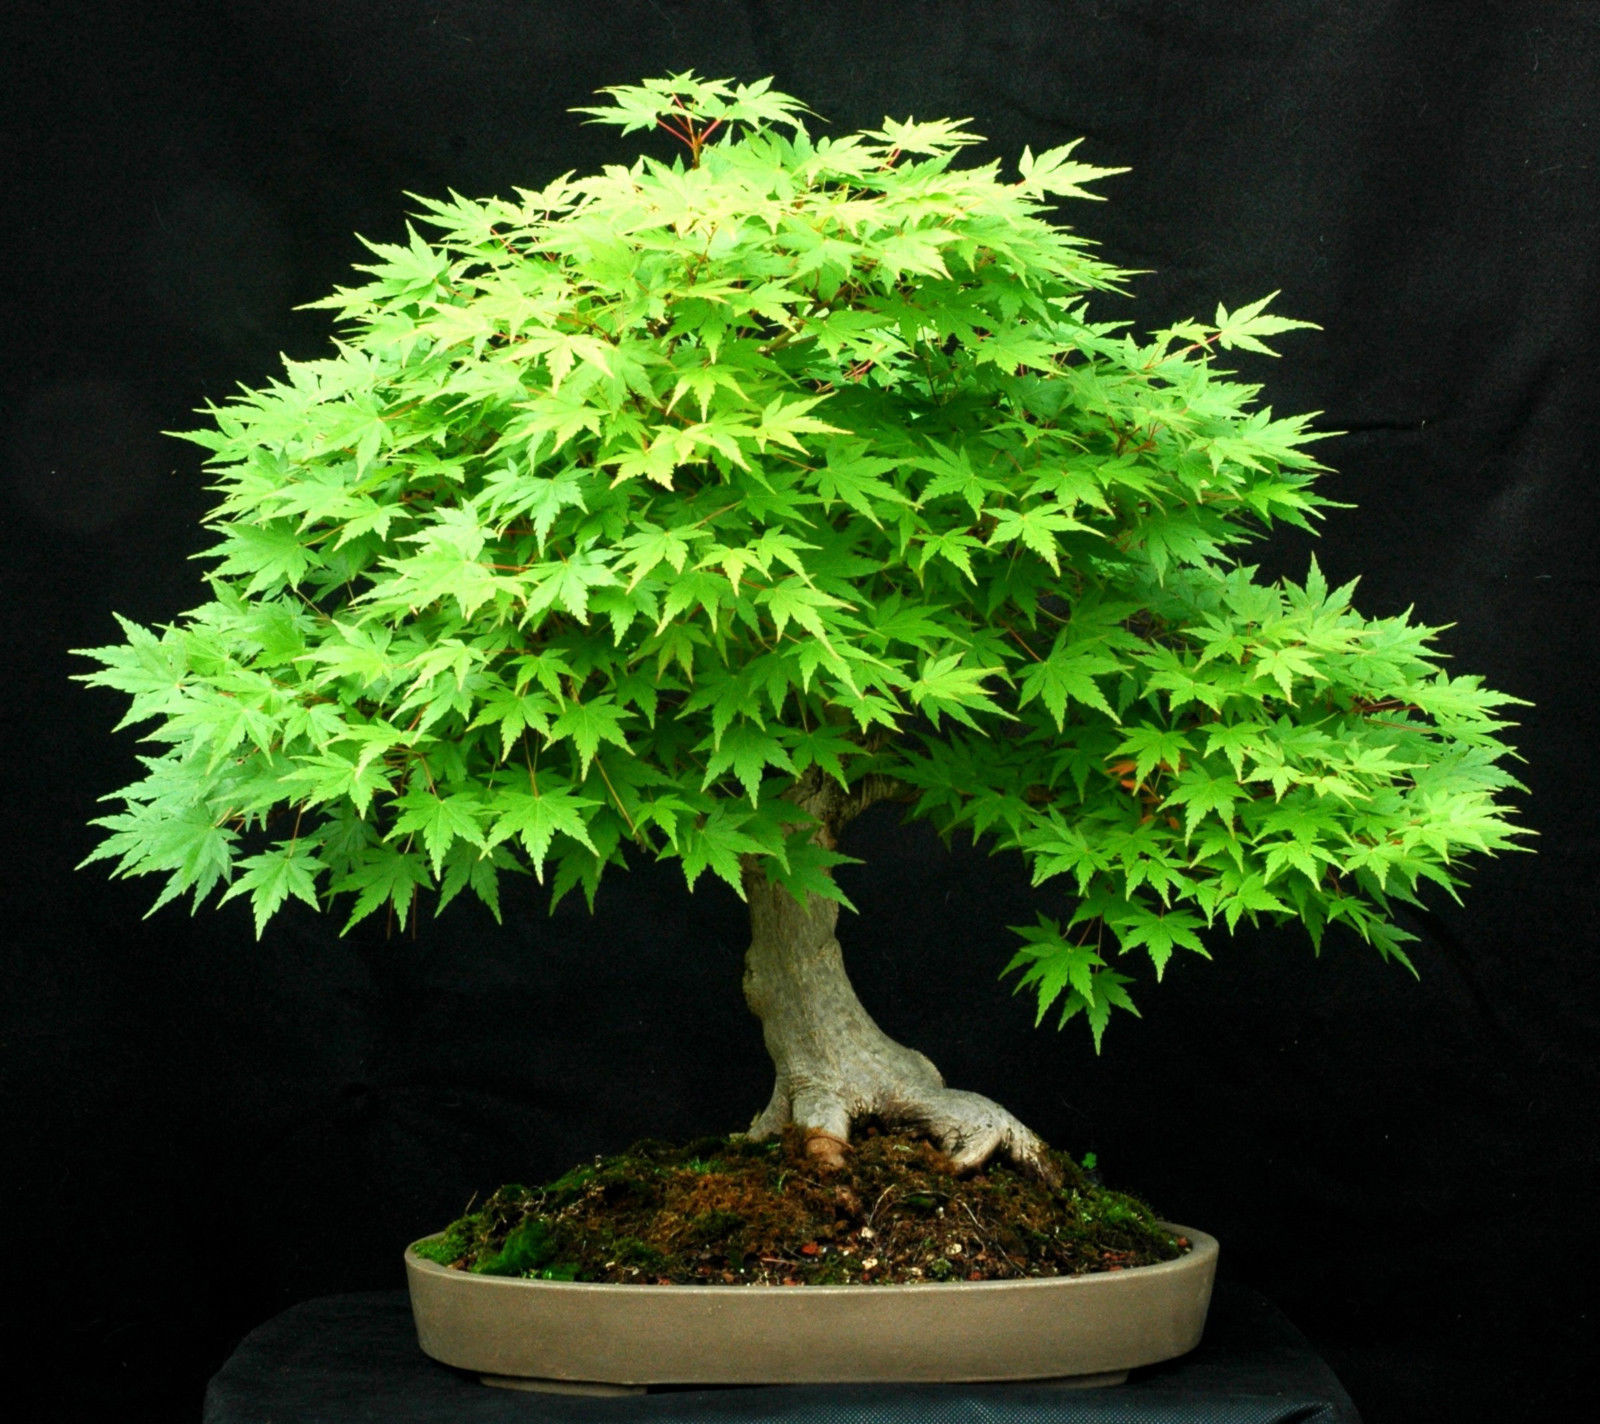 Top How To Bonsai A Maple Tree in the world The ultimate guide | leafyzen